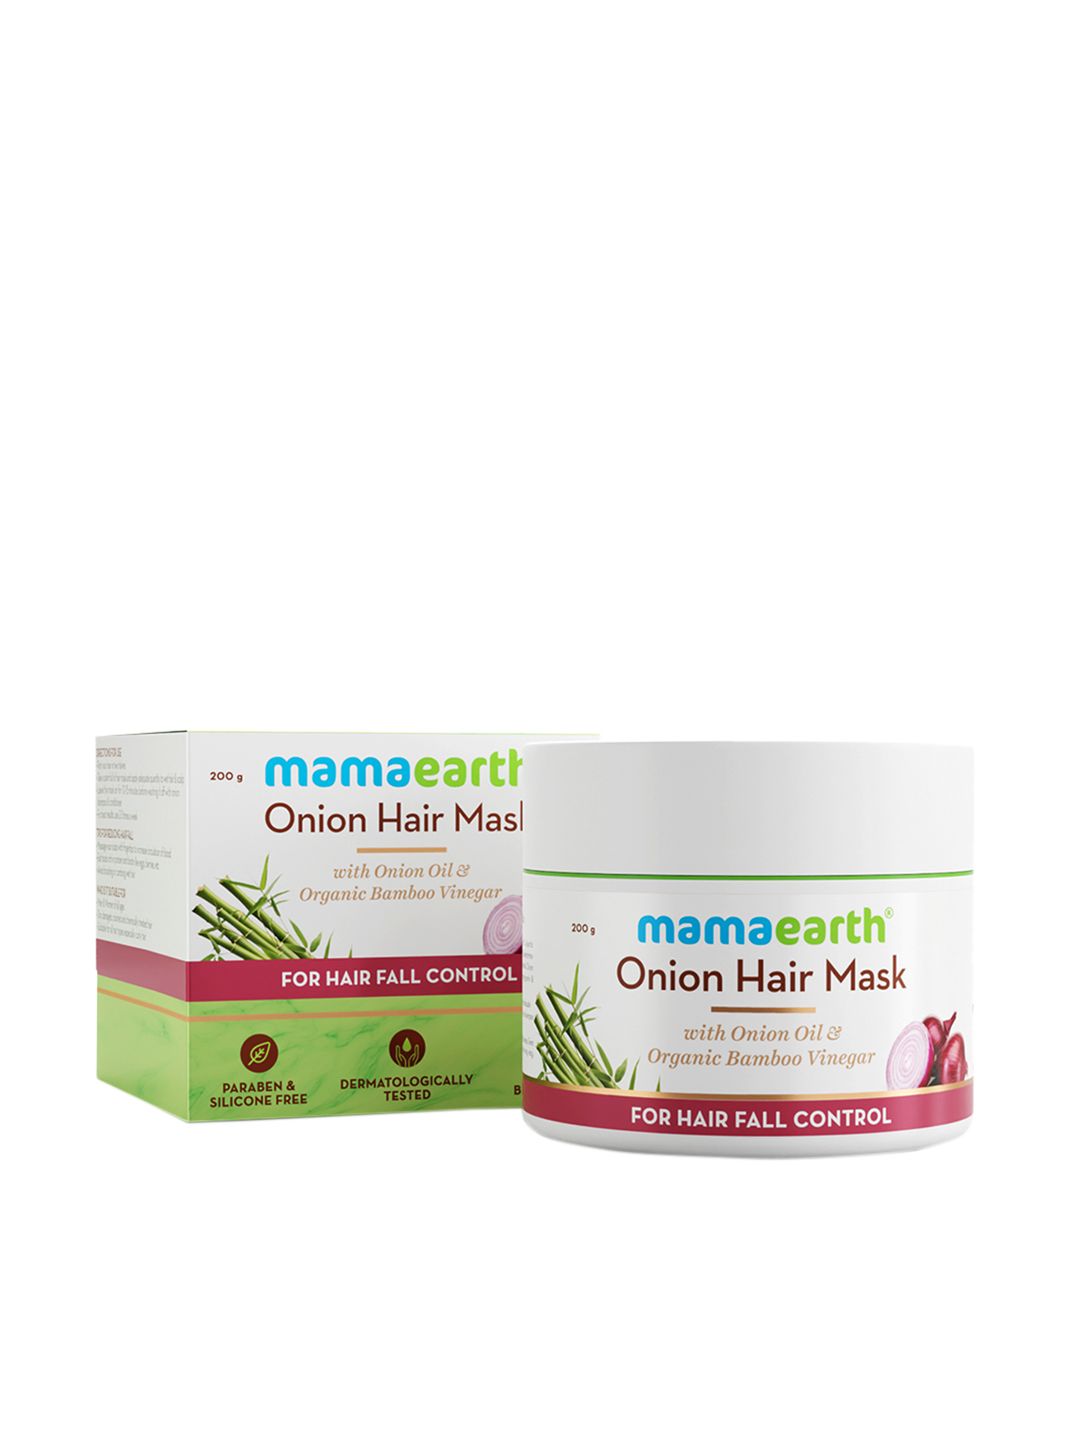 Mamaearth Onion Oil & Organic Bamboo Vinegar Sustainable Mask For Dry & Frizzy Hair 200 ml Price in India